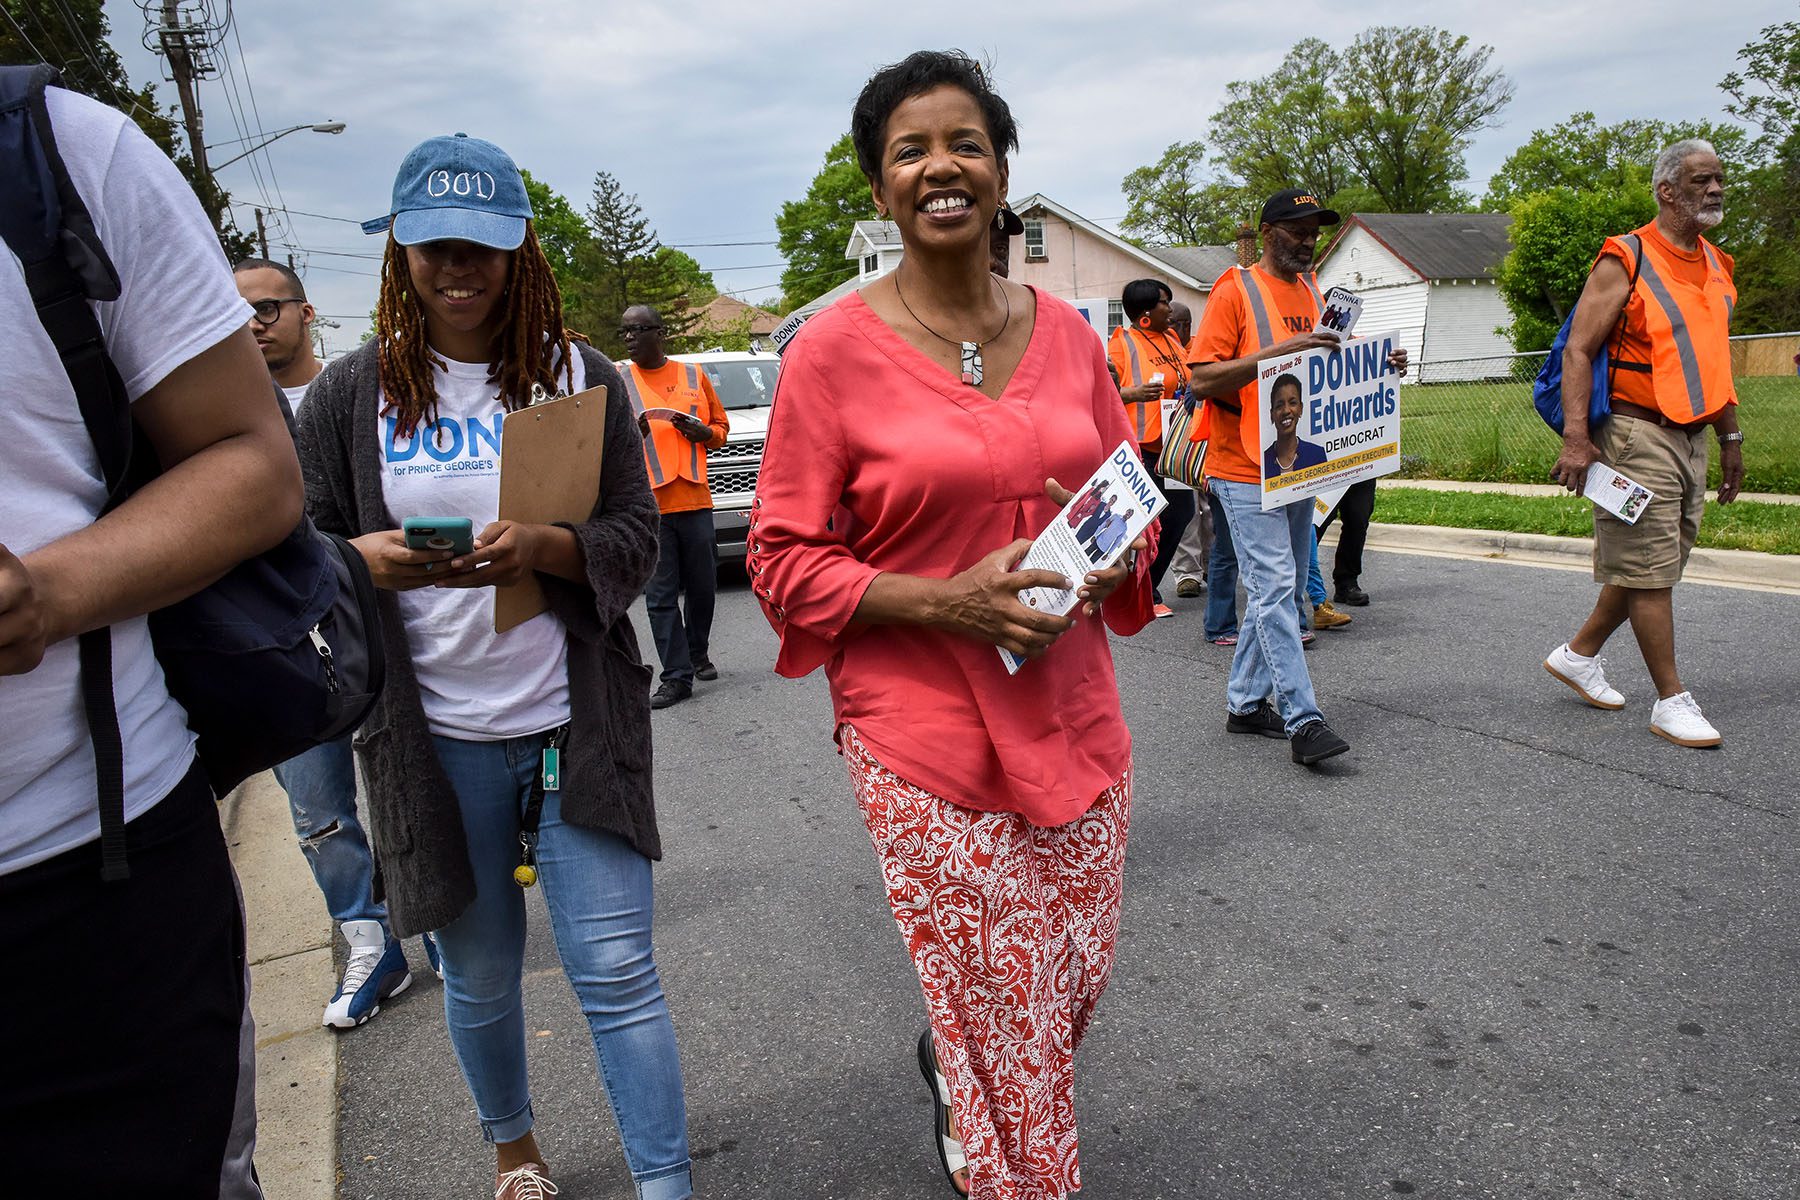 Donna Edwards walks down a street carrying a small pamphlet. Others around her carry signs that read "Donna Edwards Democrat" and wear shirts that say "Donna for Prince George's."